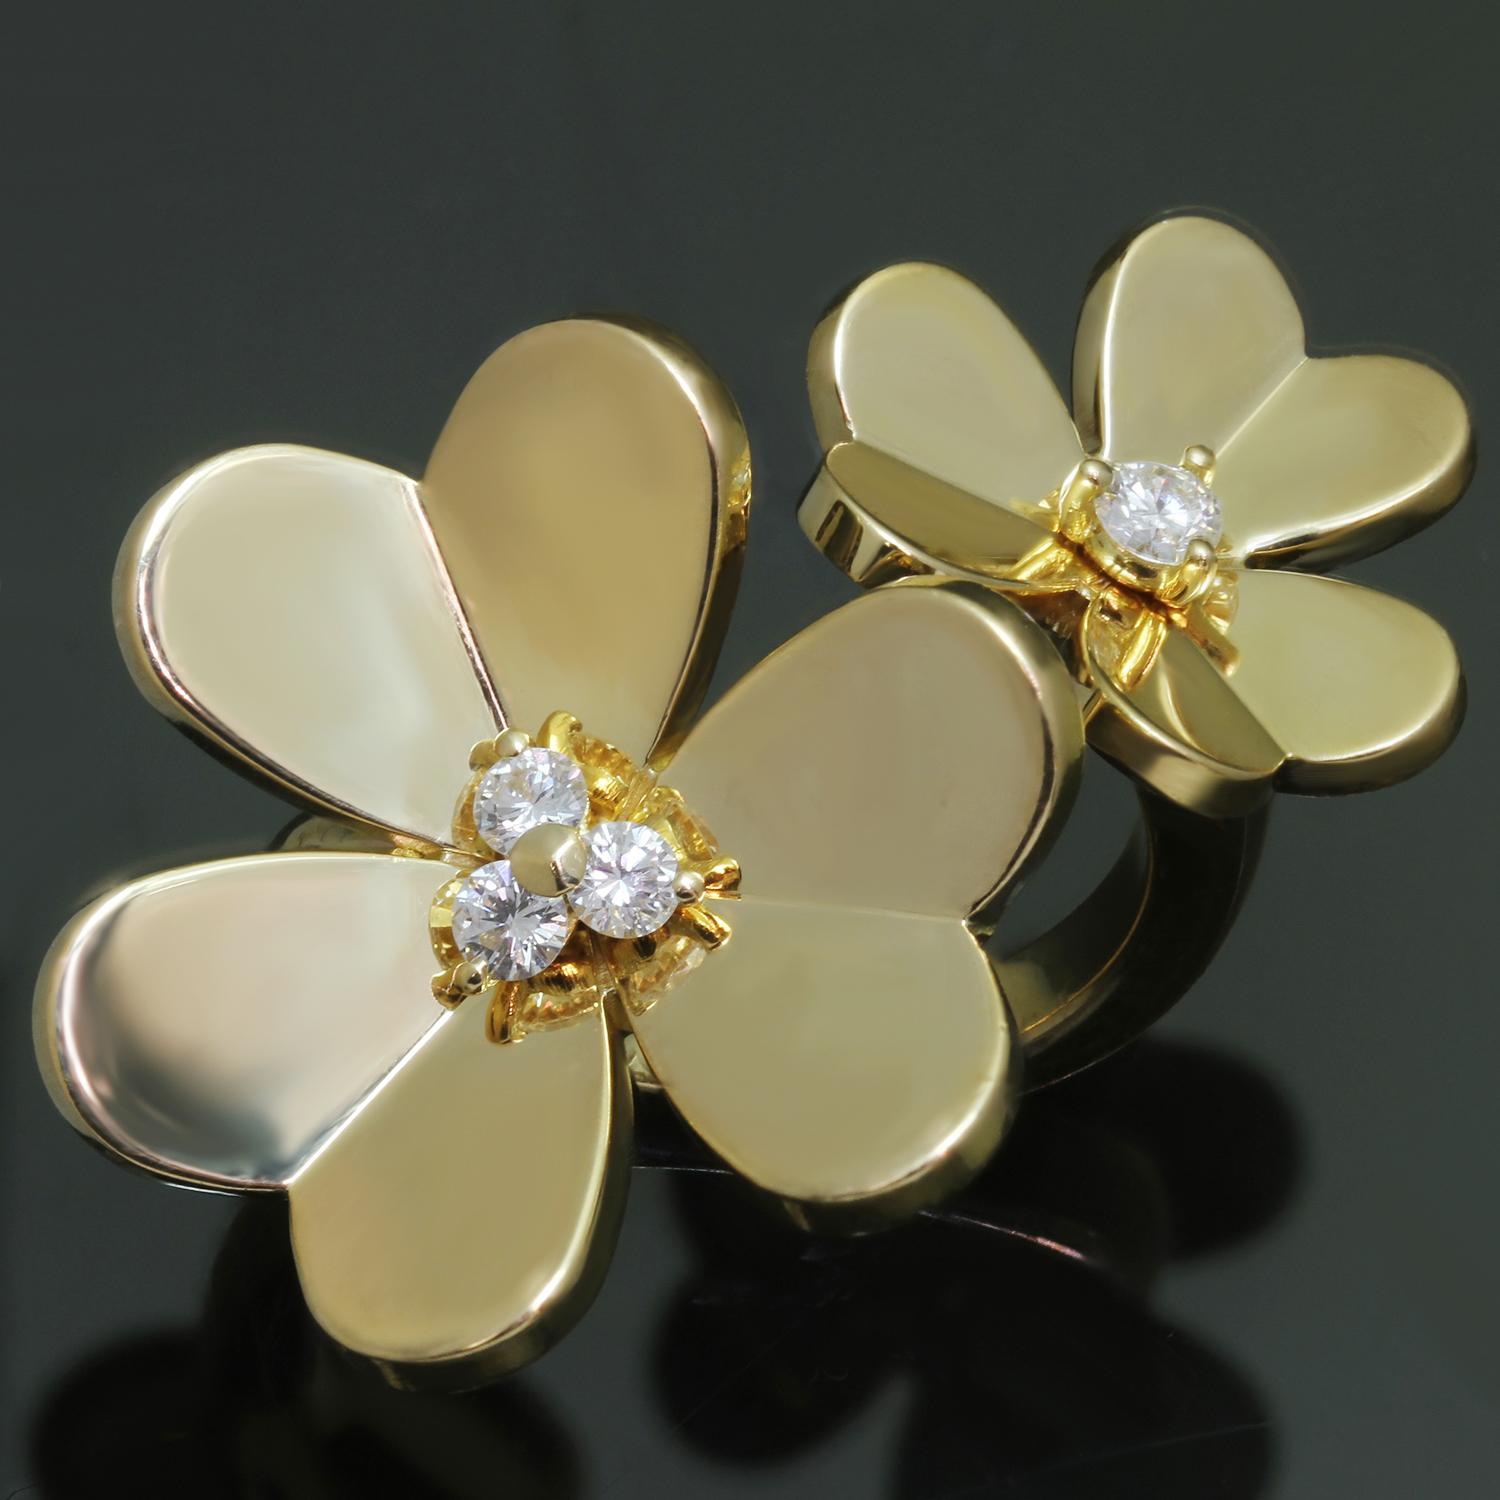 This gorgeous Van Cleef & Arpels between-the-finger ring from the iconic Frivole collection is crafted in 18k yellow gold and features an elegant two flower design set with 4 brilliant-cut round D-F VVS1-VVS2 diamonds of an estimated 0.24 carats.